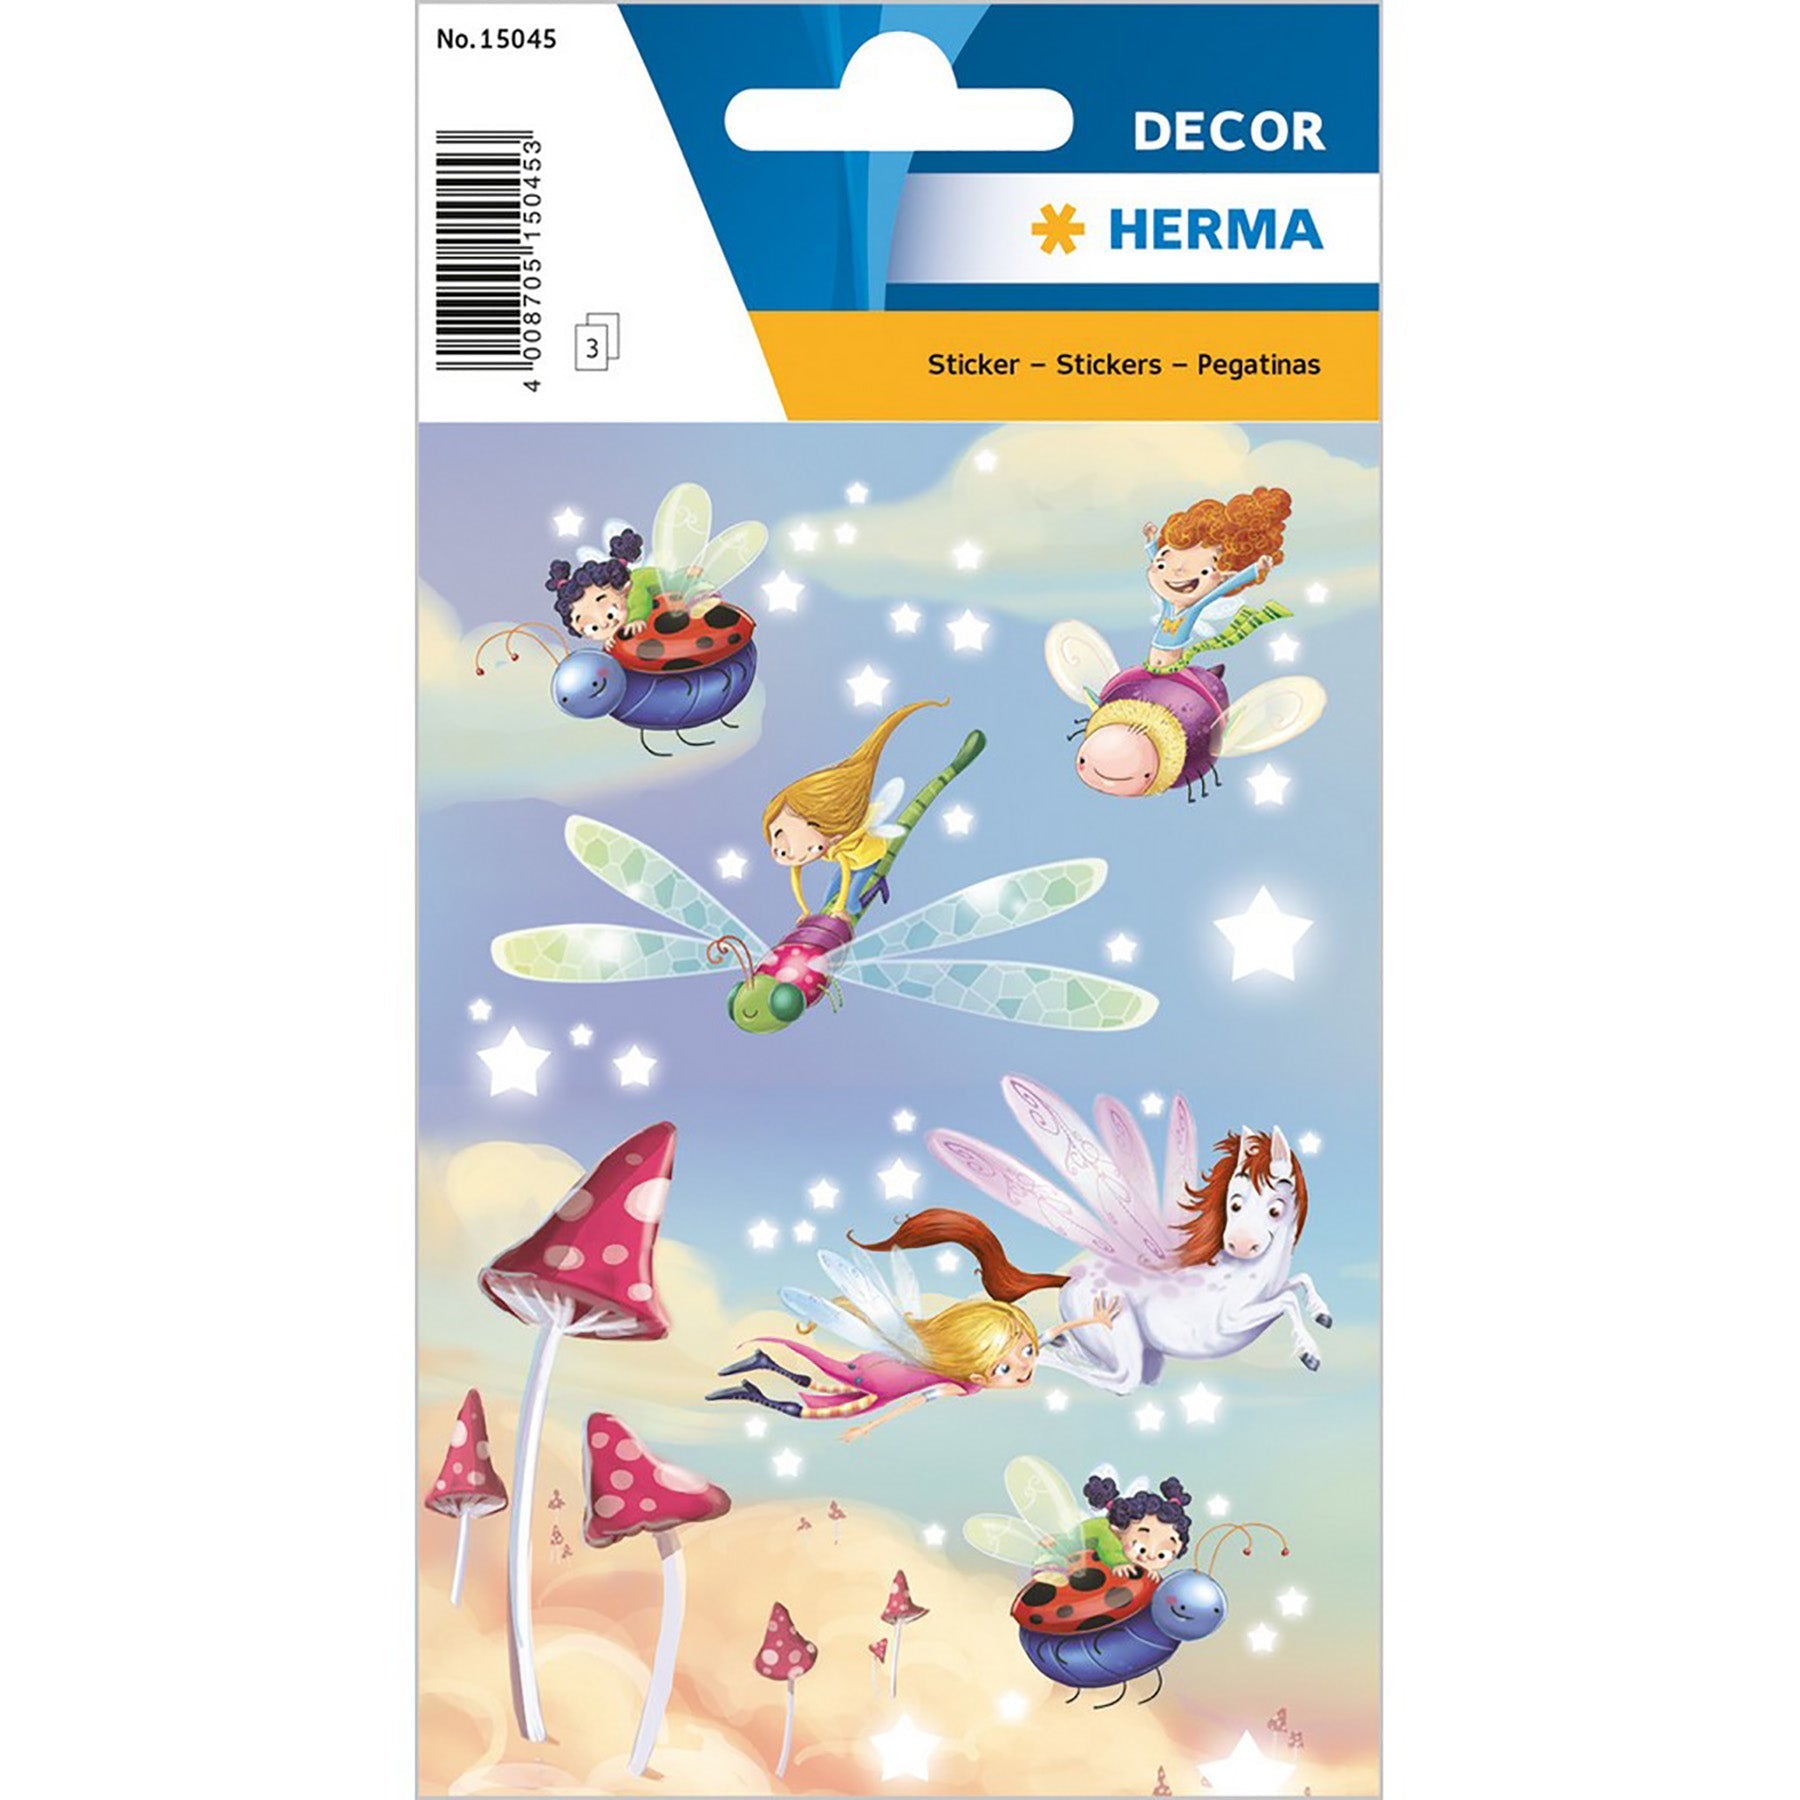 Herma Décor 3 Sheets Stickers Elves Dance 4.75x3.1in Sheet